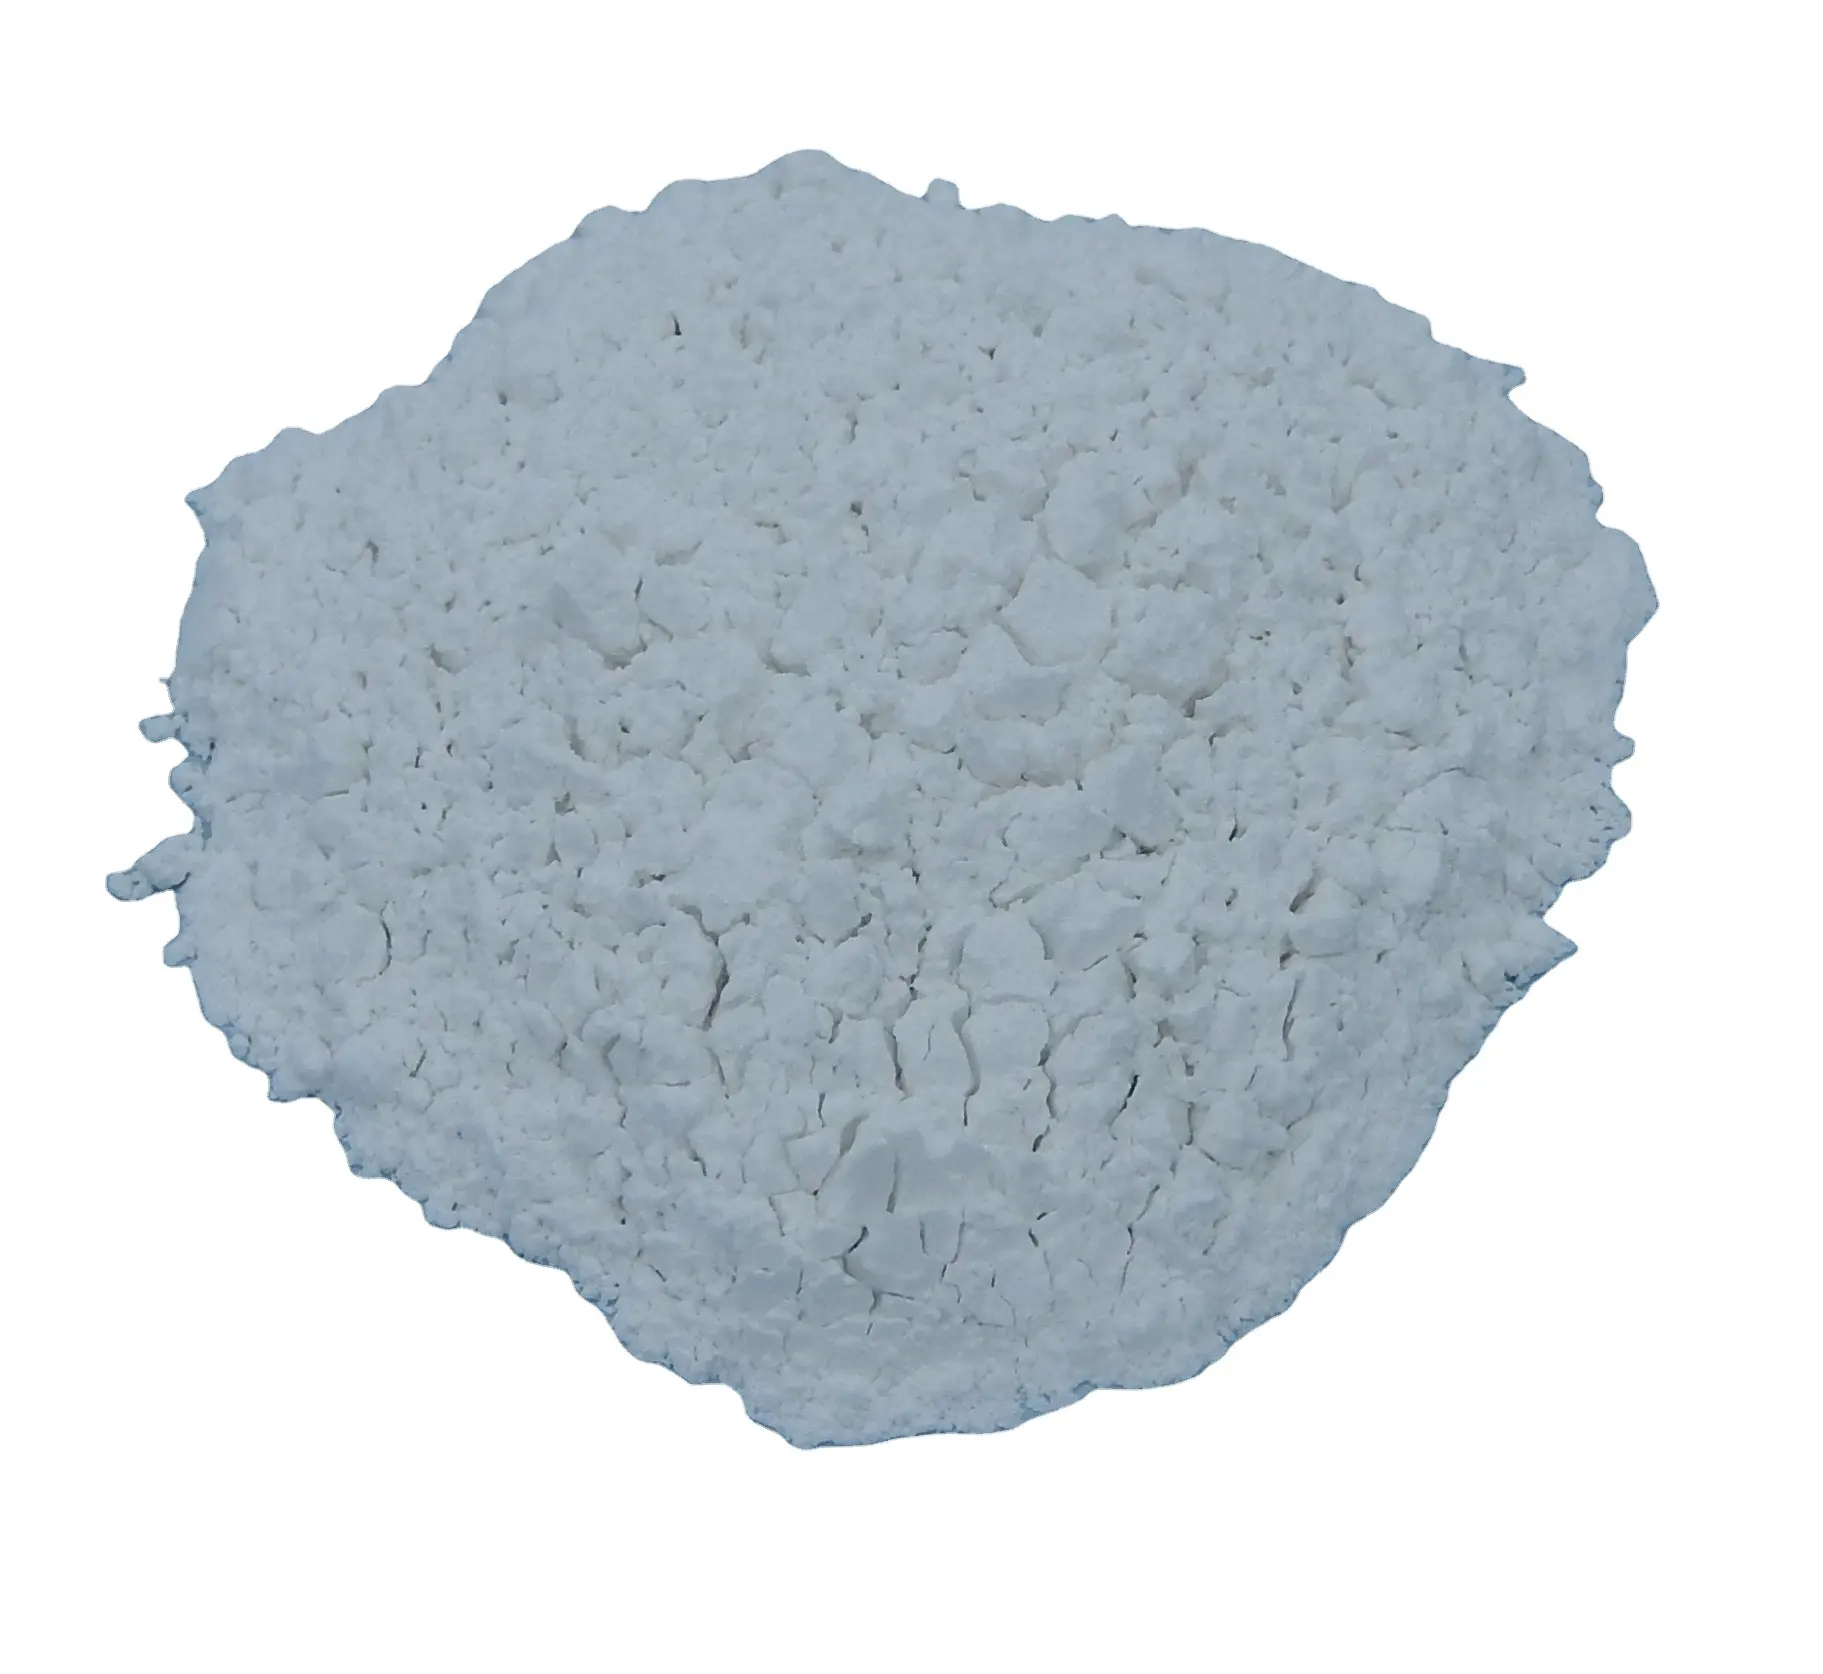 CrystalPure Quartz Silica Powder ensures optimal performance in various applications, from cosmetics to industrial processes